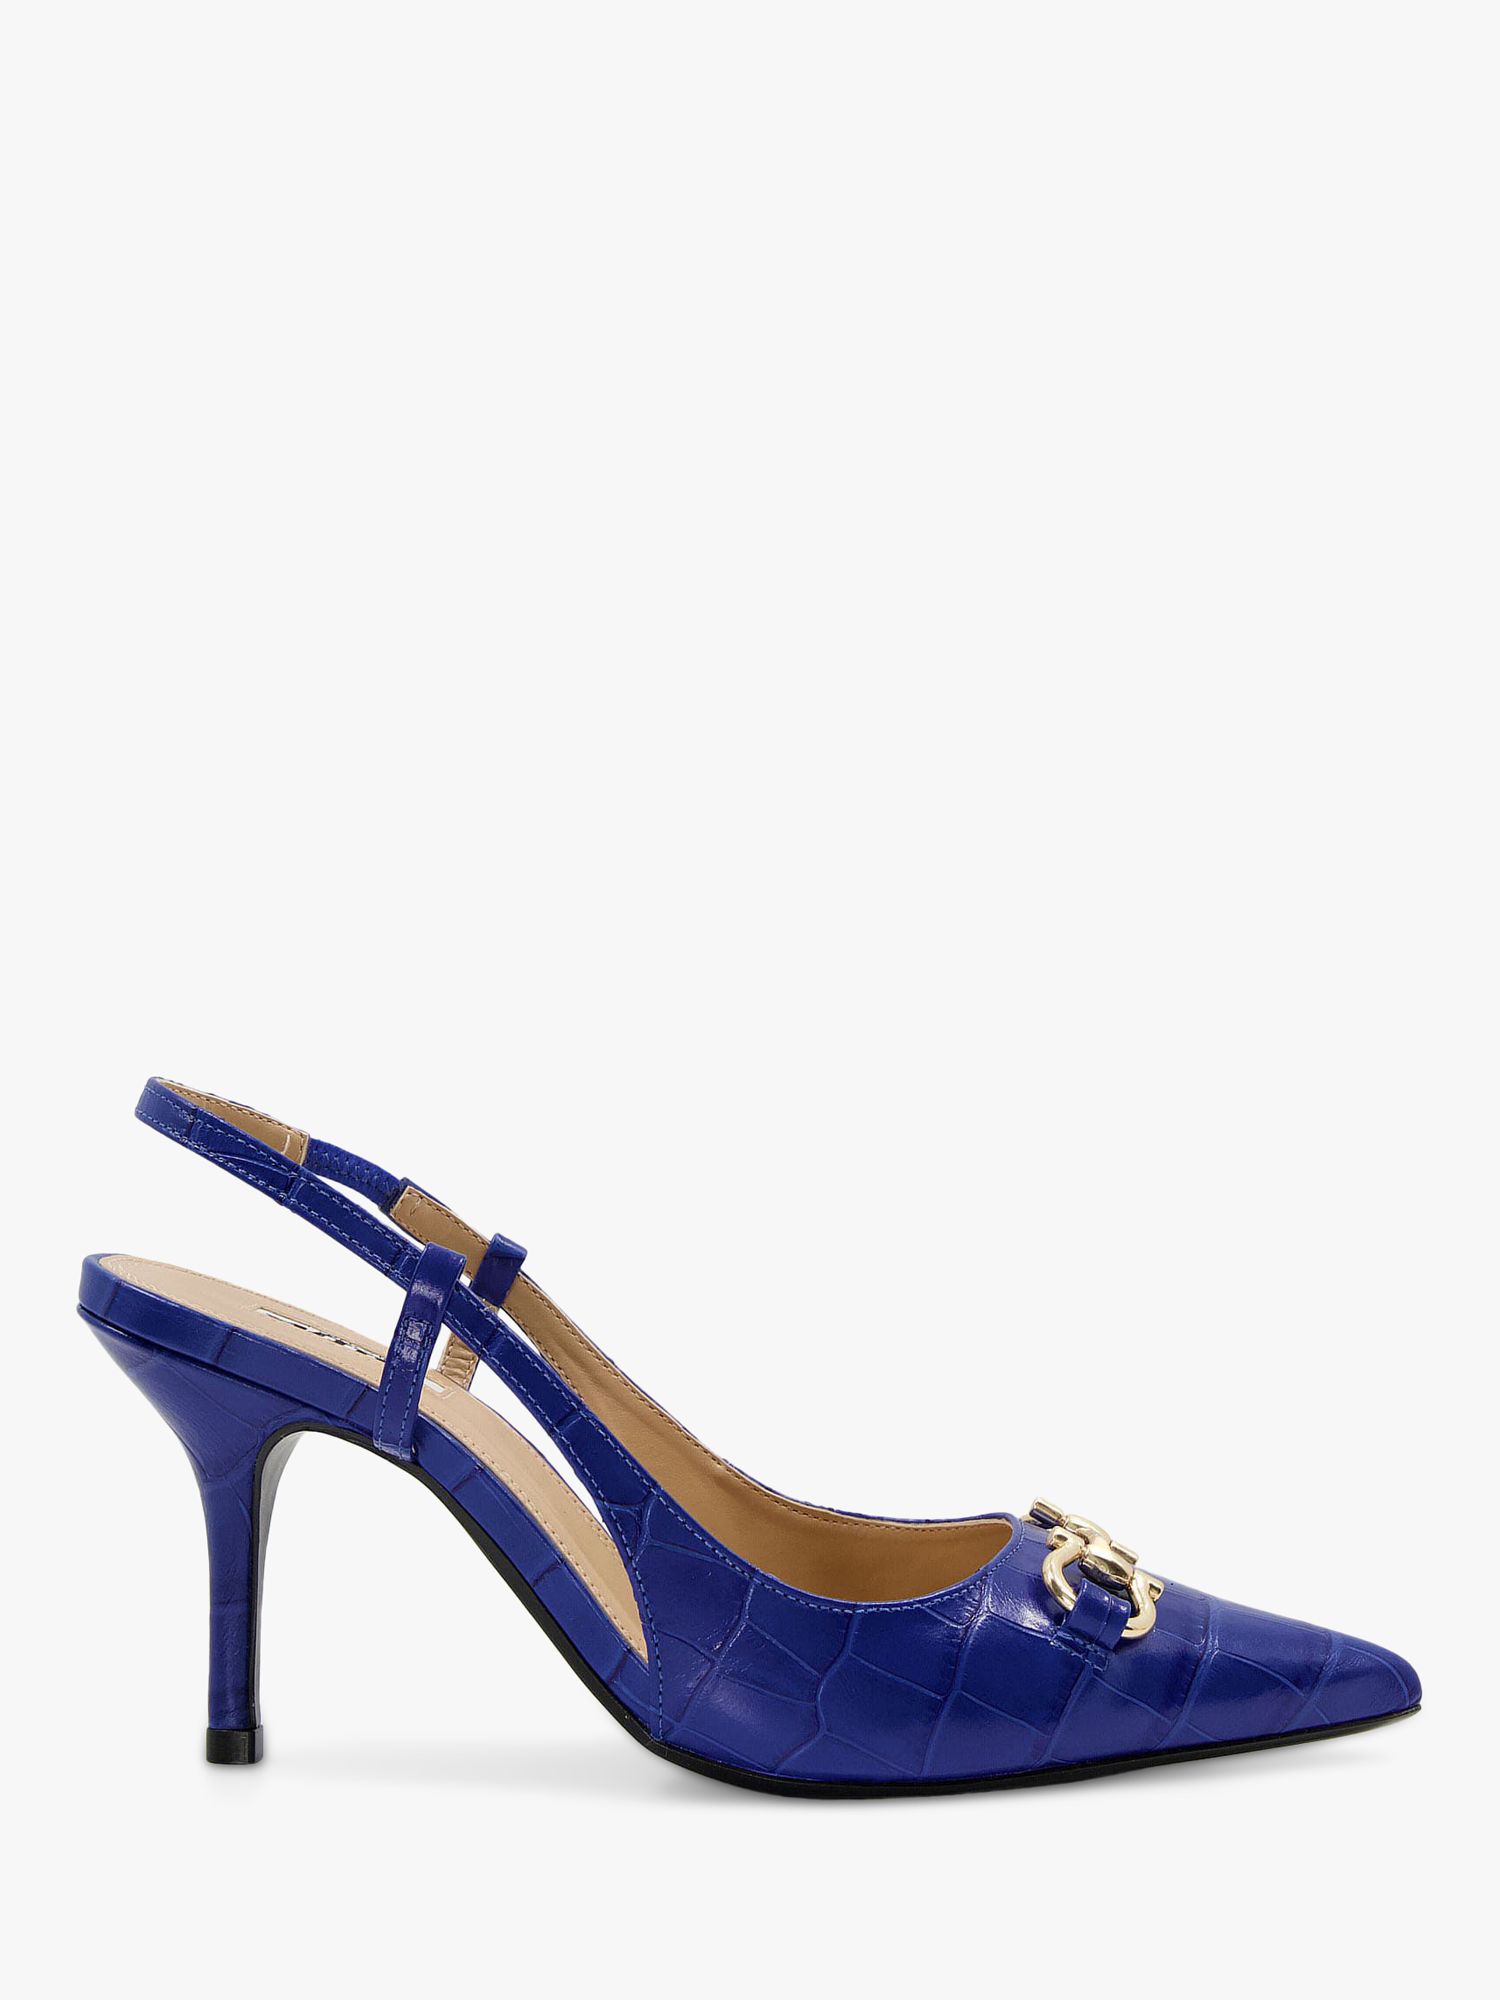 Dune Click Leather Slingback Court Shoes, Blue at John Lewis & Partners